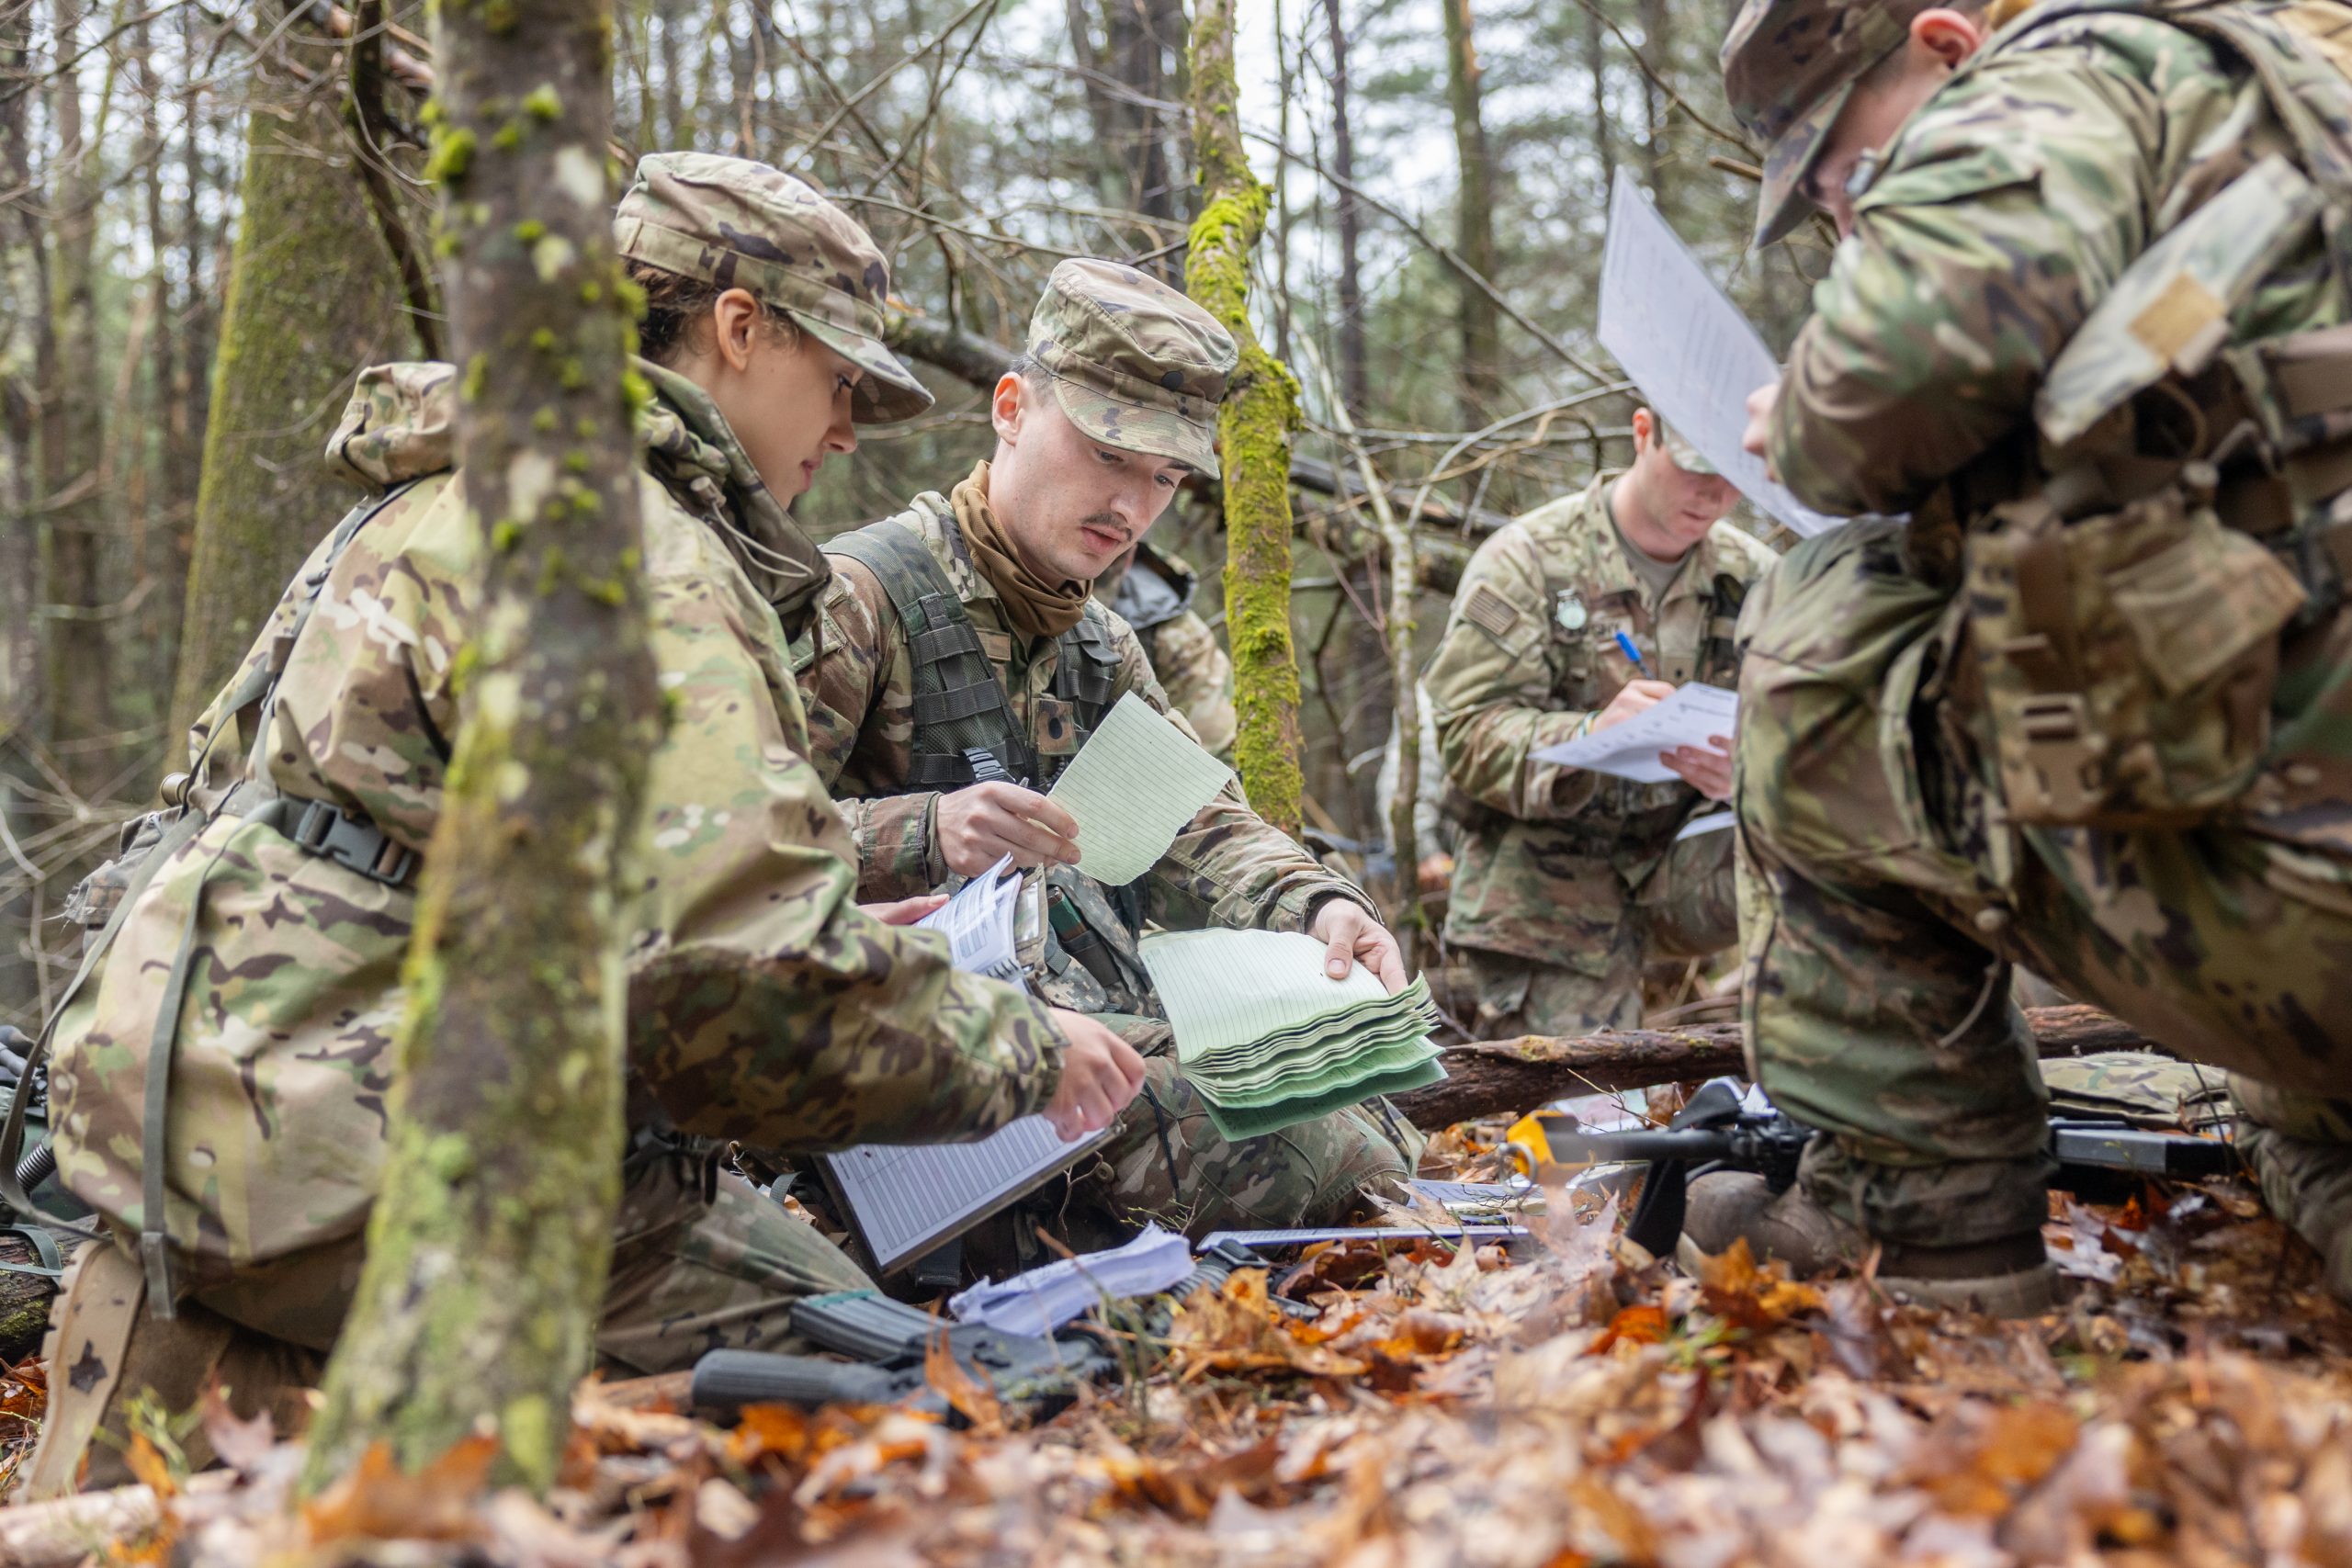 Army ROTC cadets work during an exercise on the second day of the Combined Field Training Exercise (CFTX) at Fort Devens.